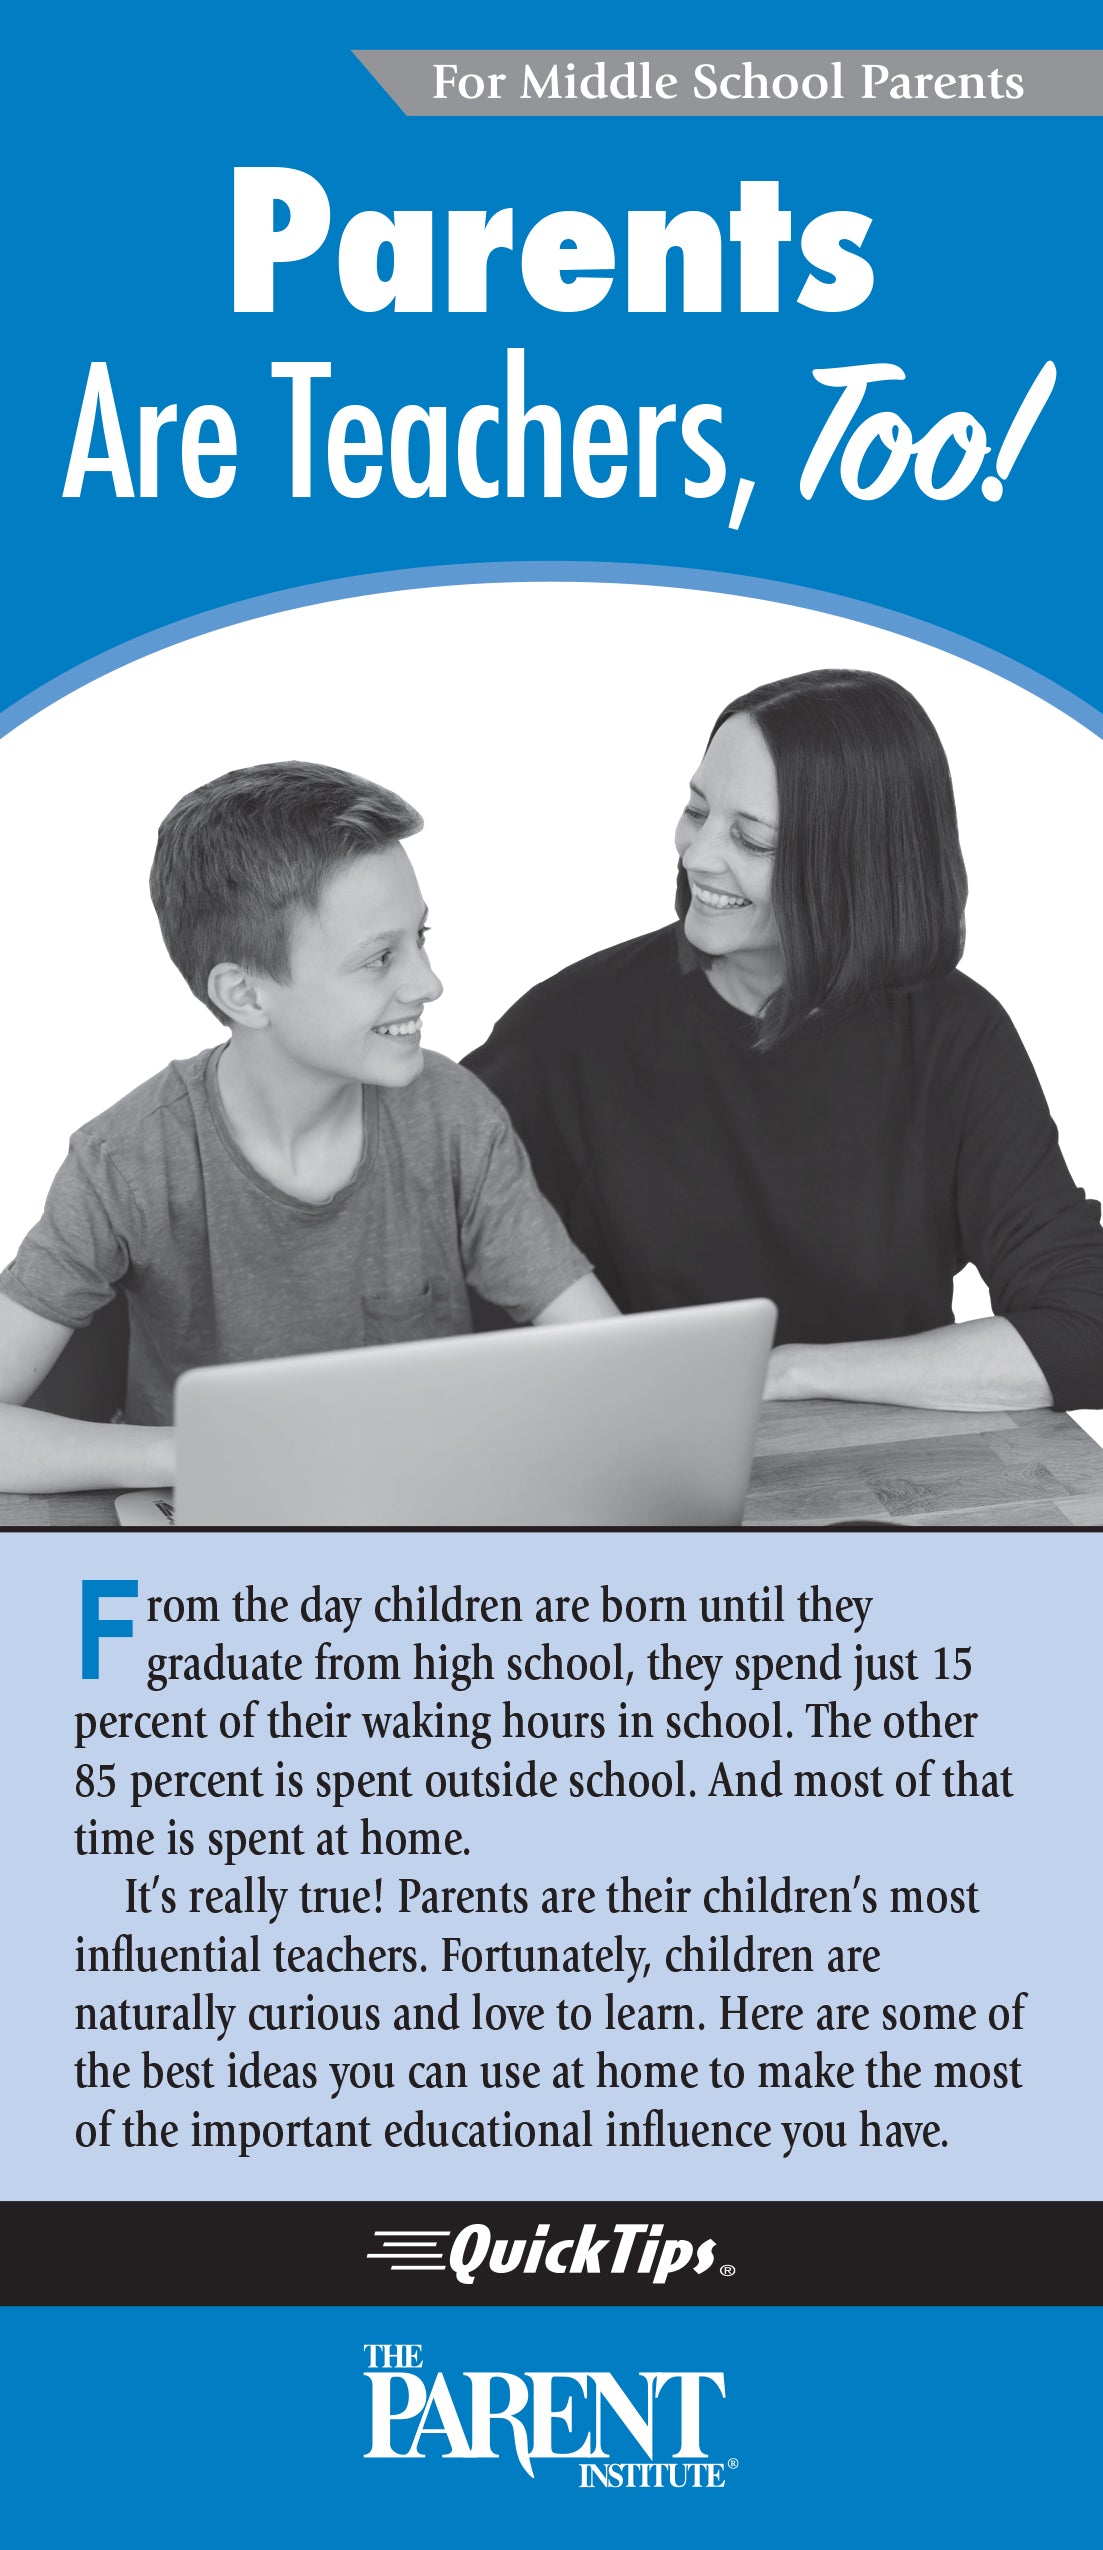 Parents Are Teachers, Too! QuickTips Brochure for Families